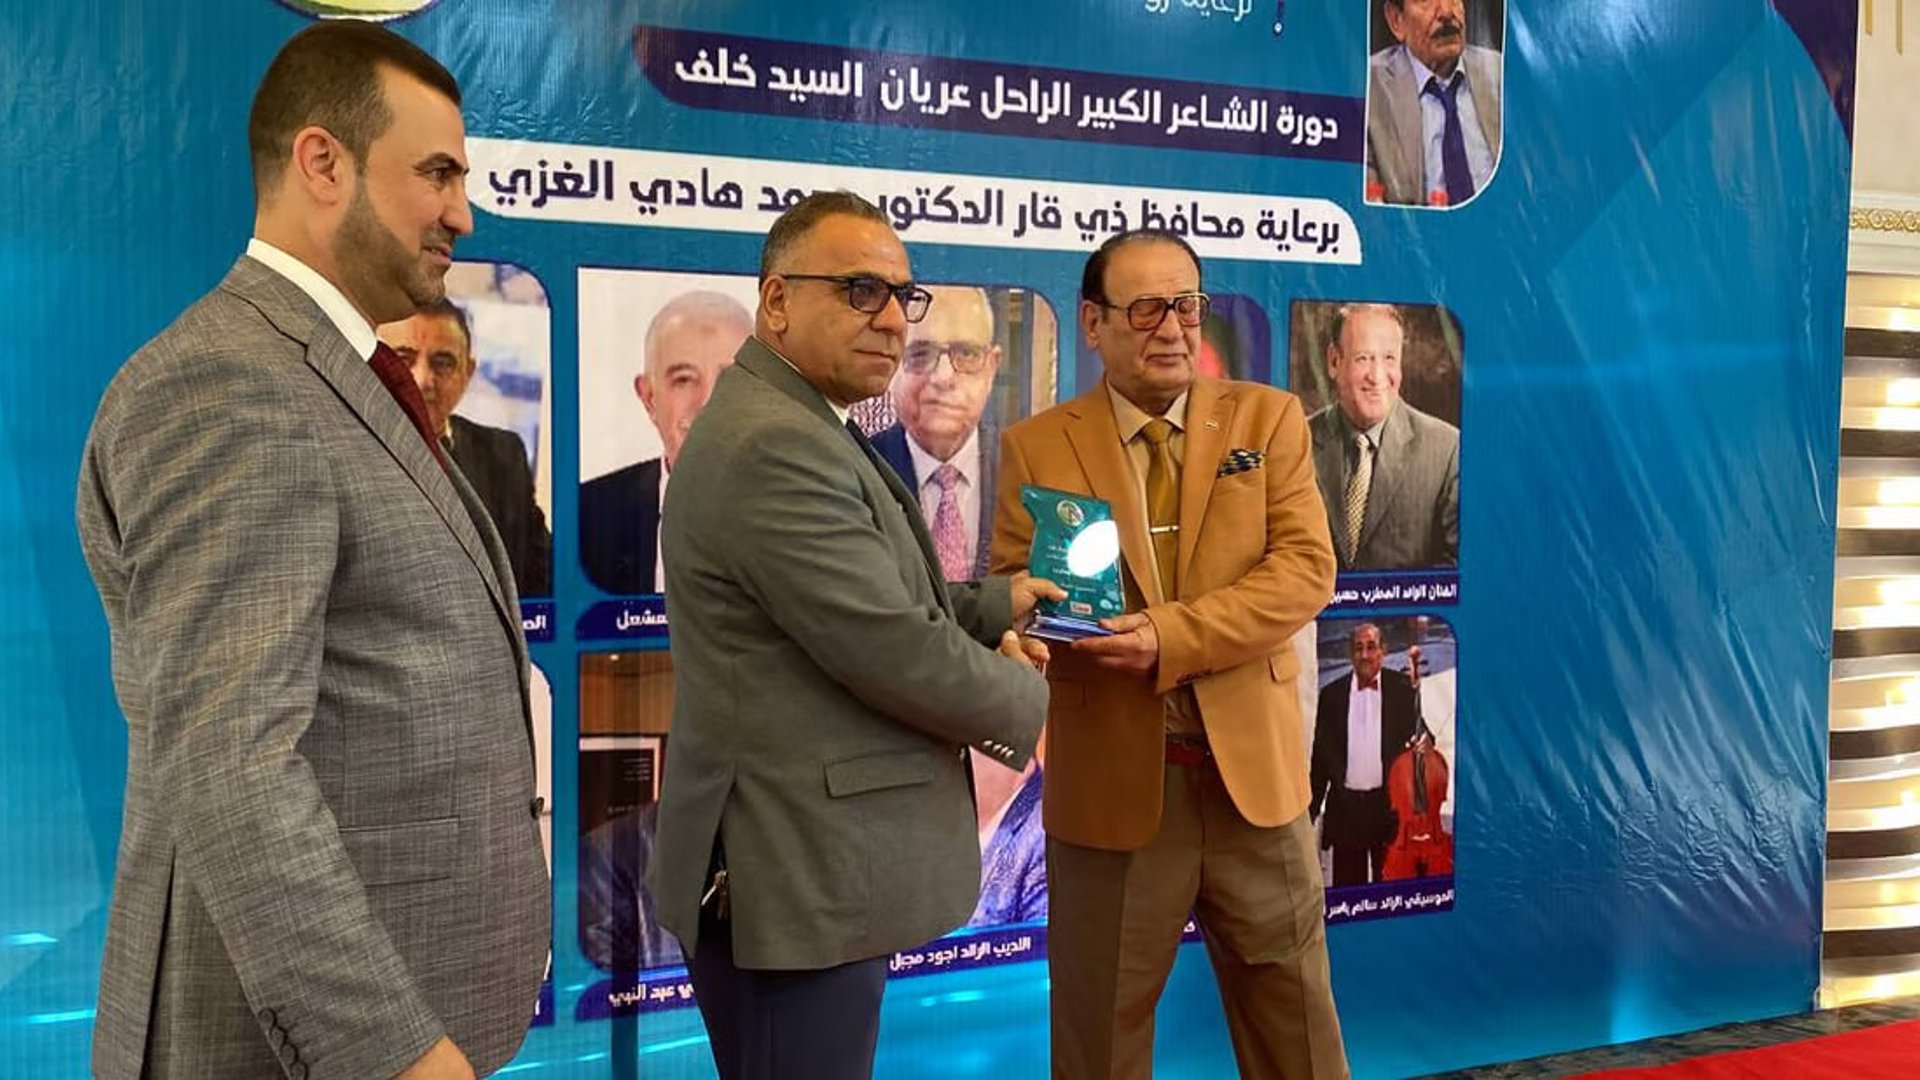 Nasiriyah city honors pioneering artists and journalists in Aryan AlSayed Khalef ceremony